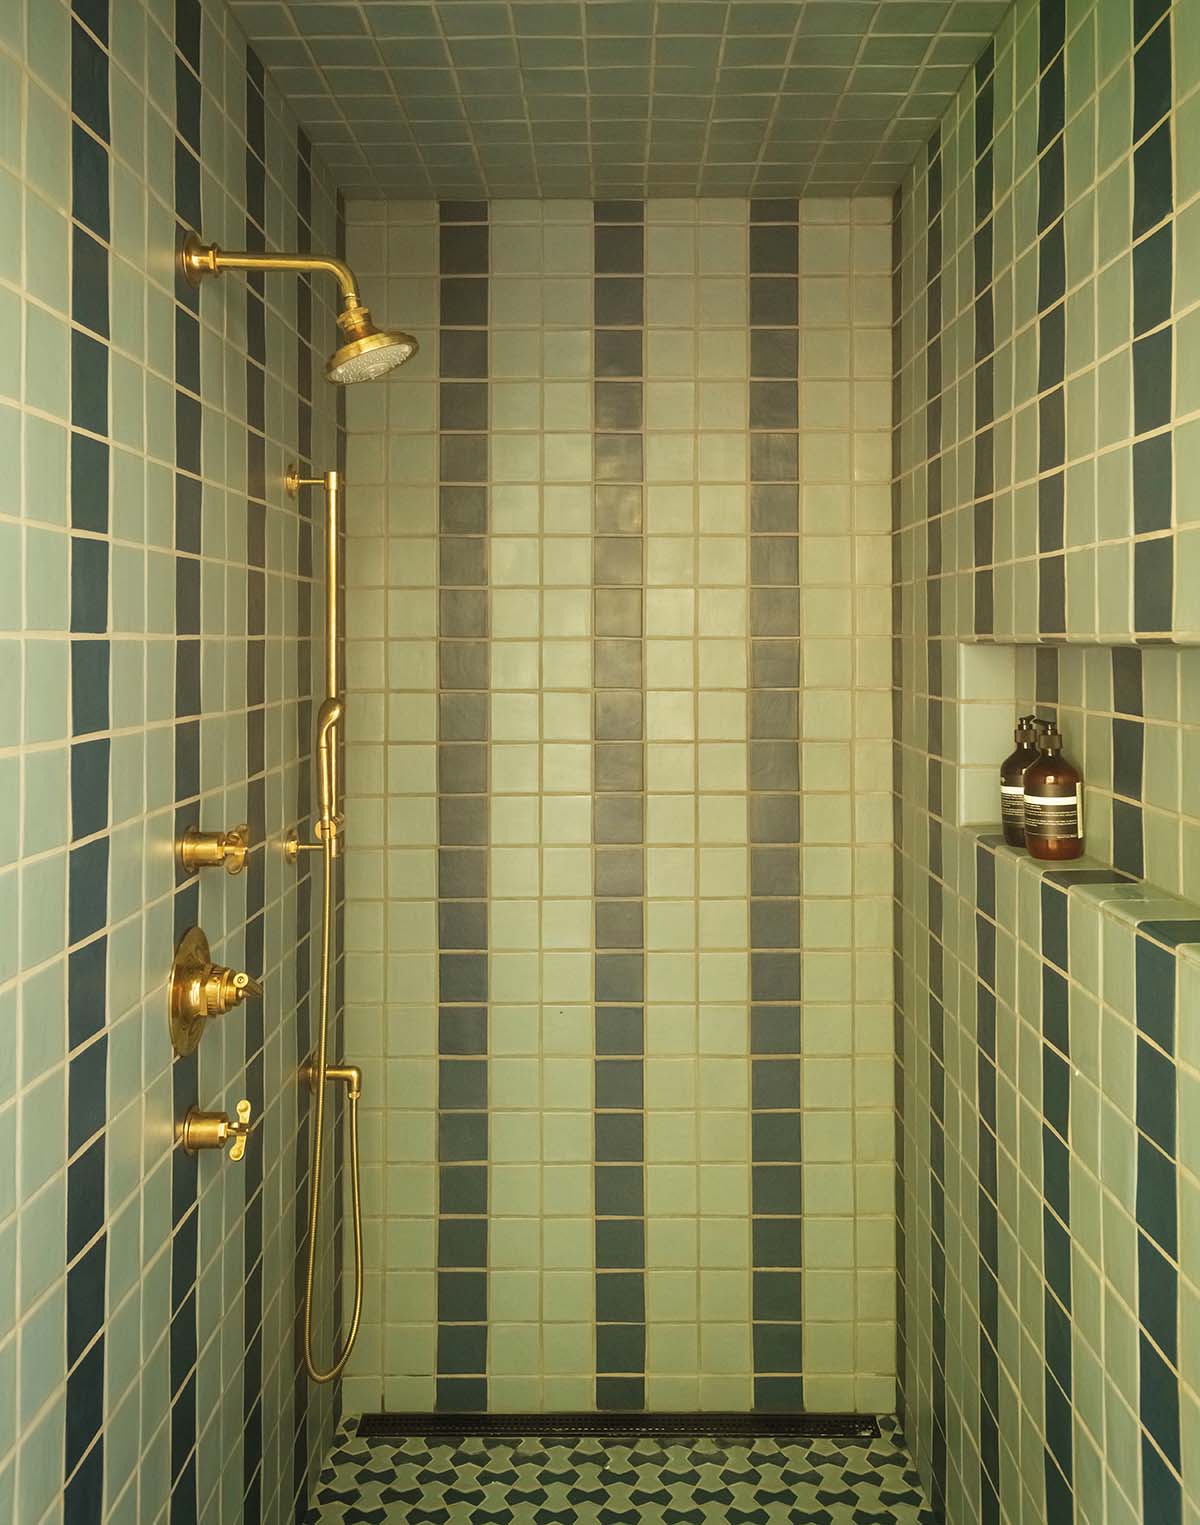 A shower tiled in two shades of green, creating a pattern of vertical stripes. Shower fittings are in gold.